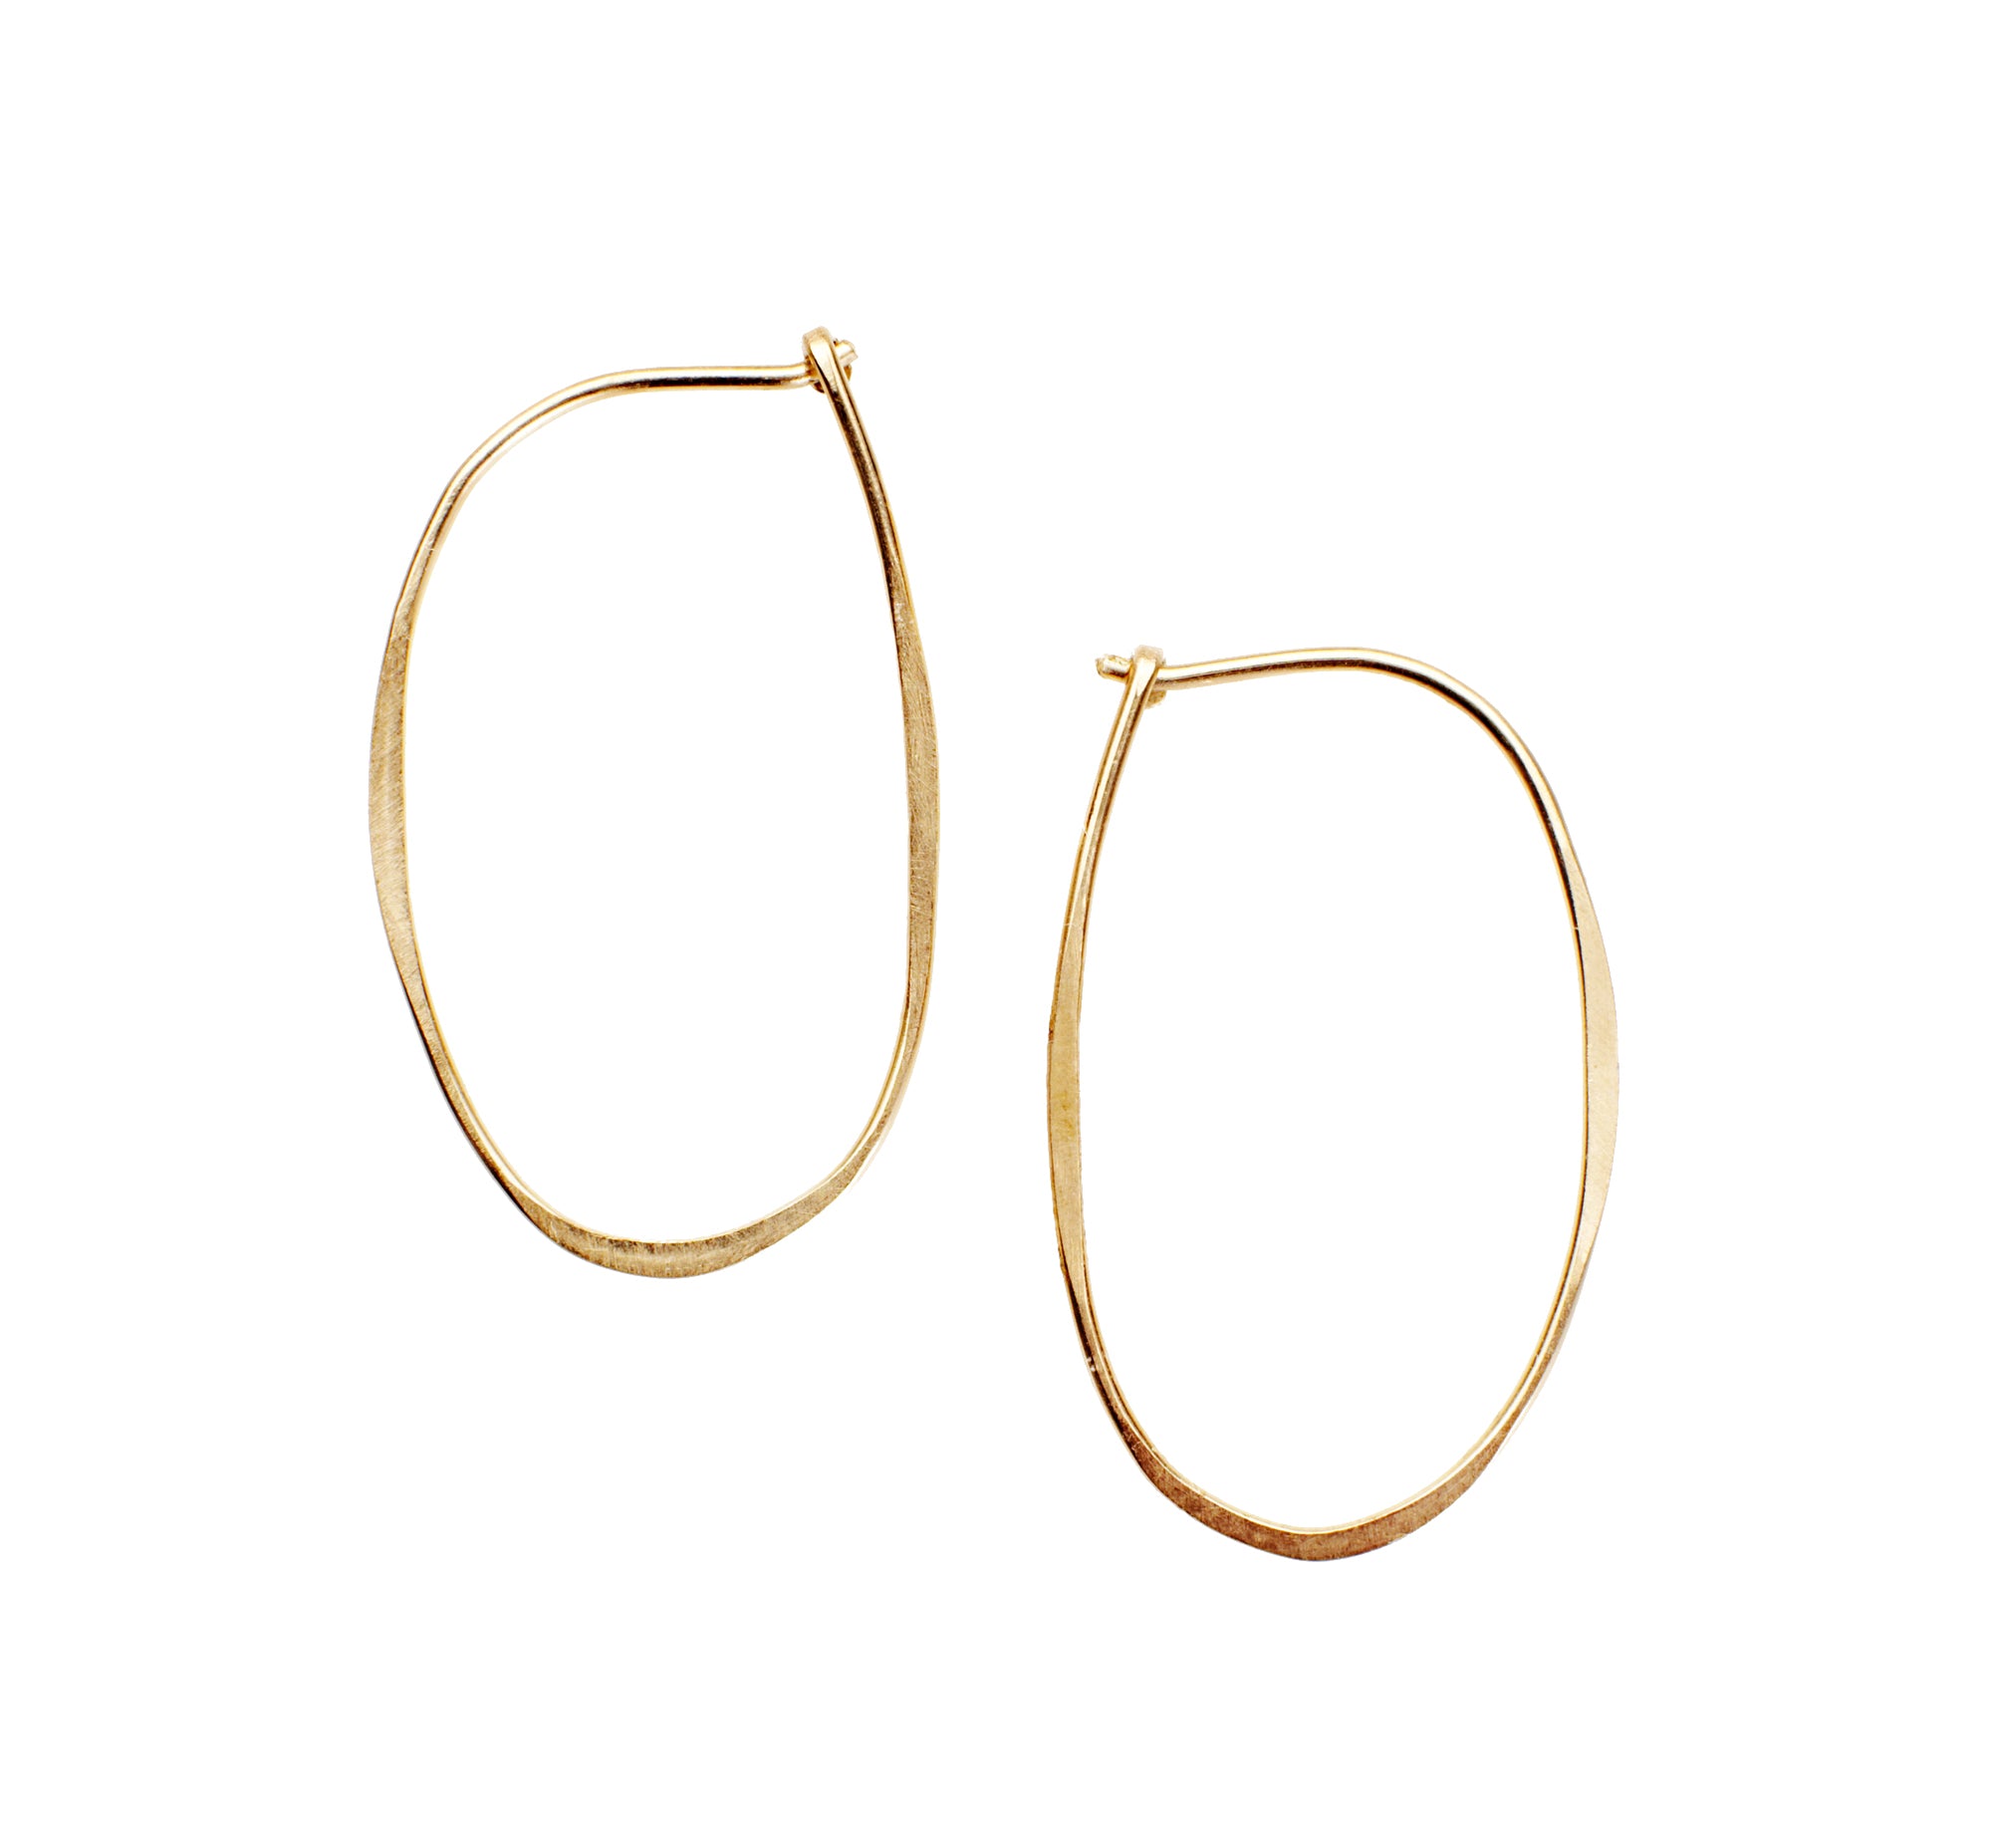 Elongated Oval Hoop, a handmade modern hoop earring made from hammered 14k gold wire finished with a hook closure.